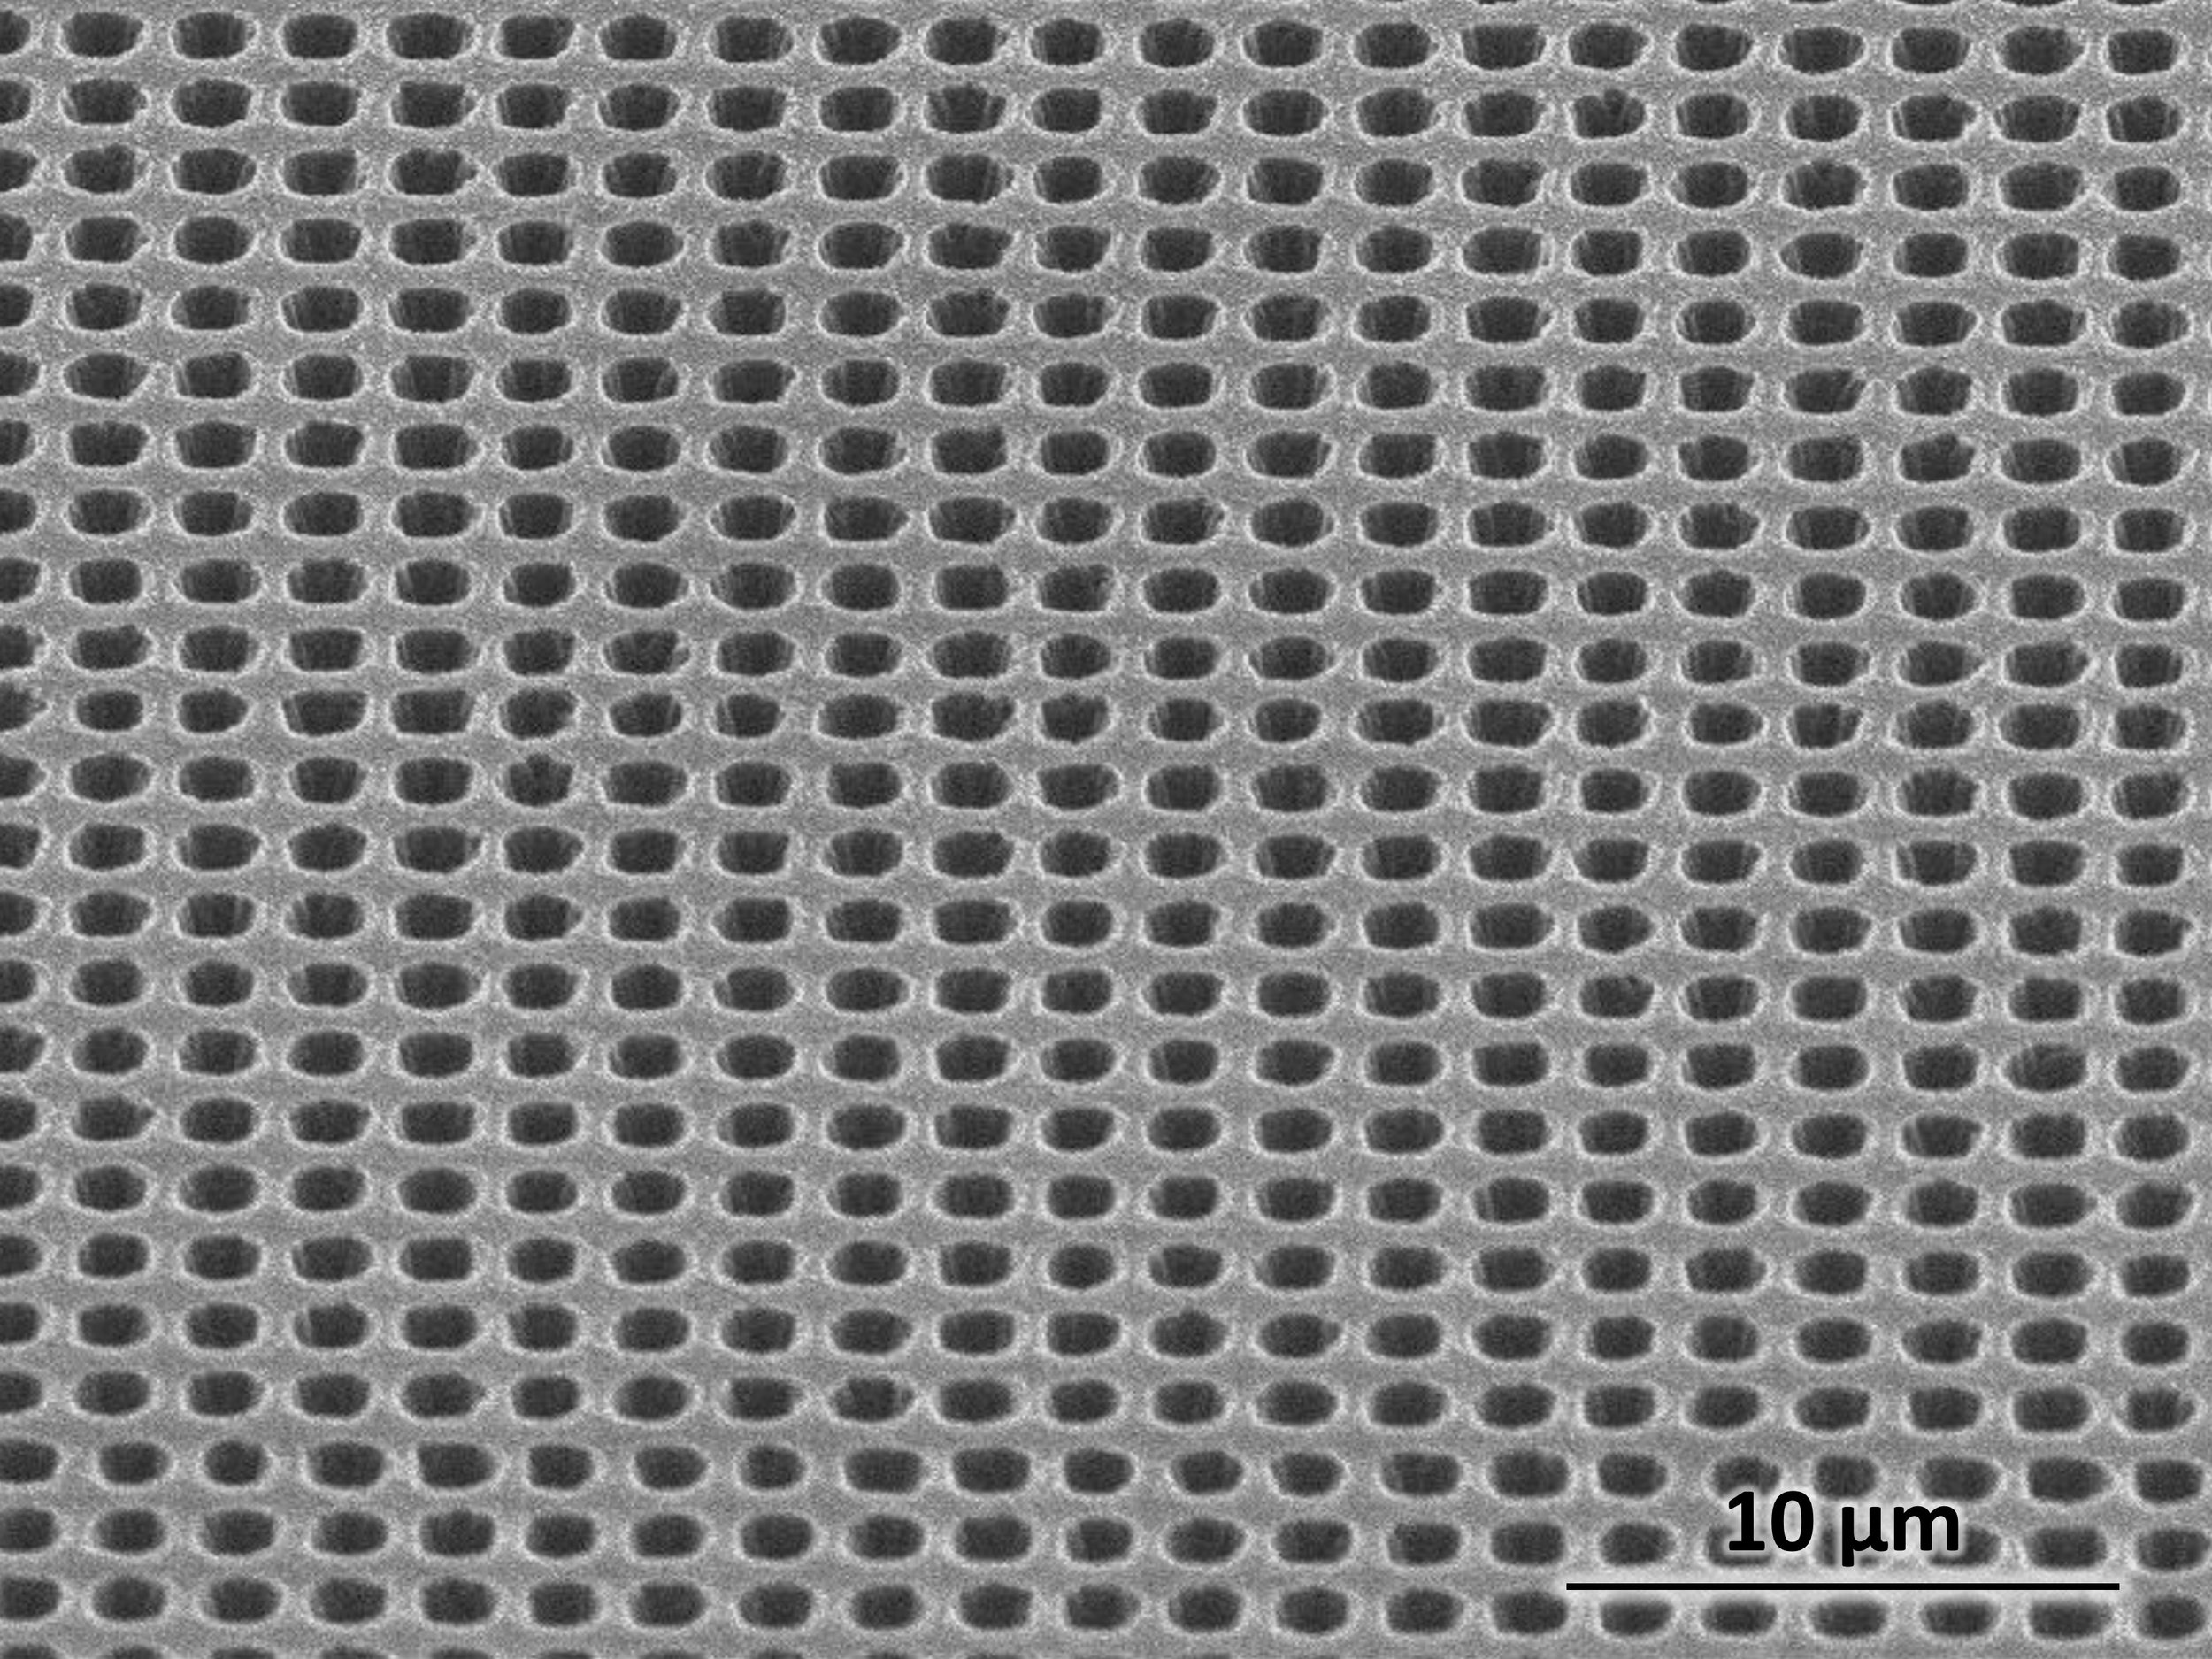 Silicon patterned using nanocoining, NIL, and etching